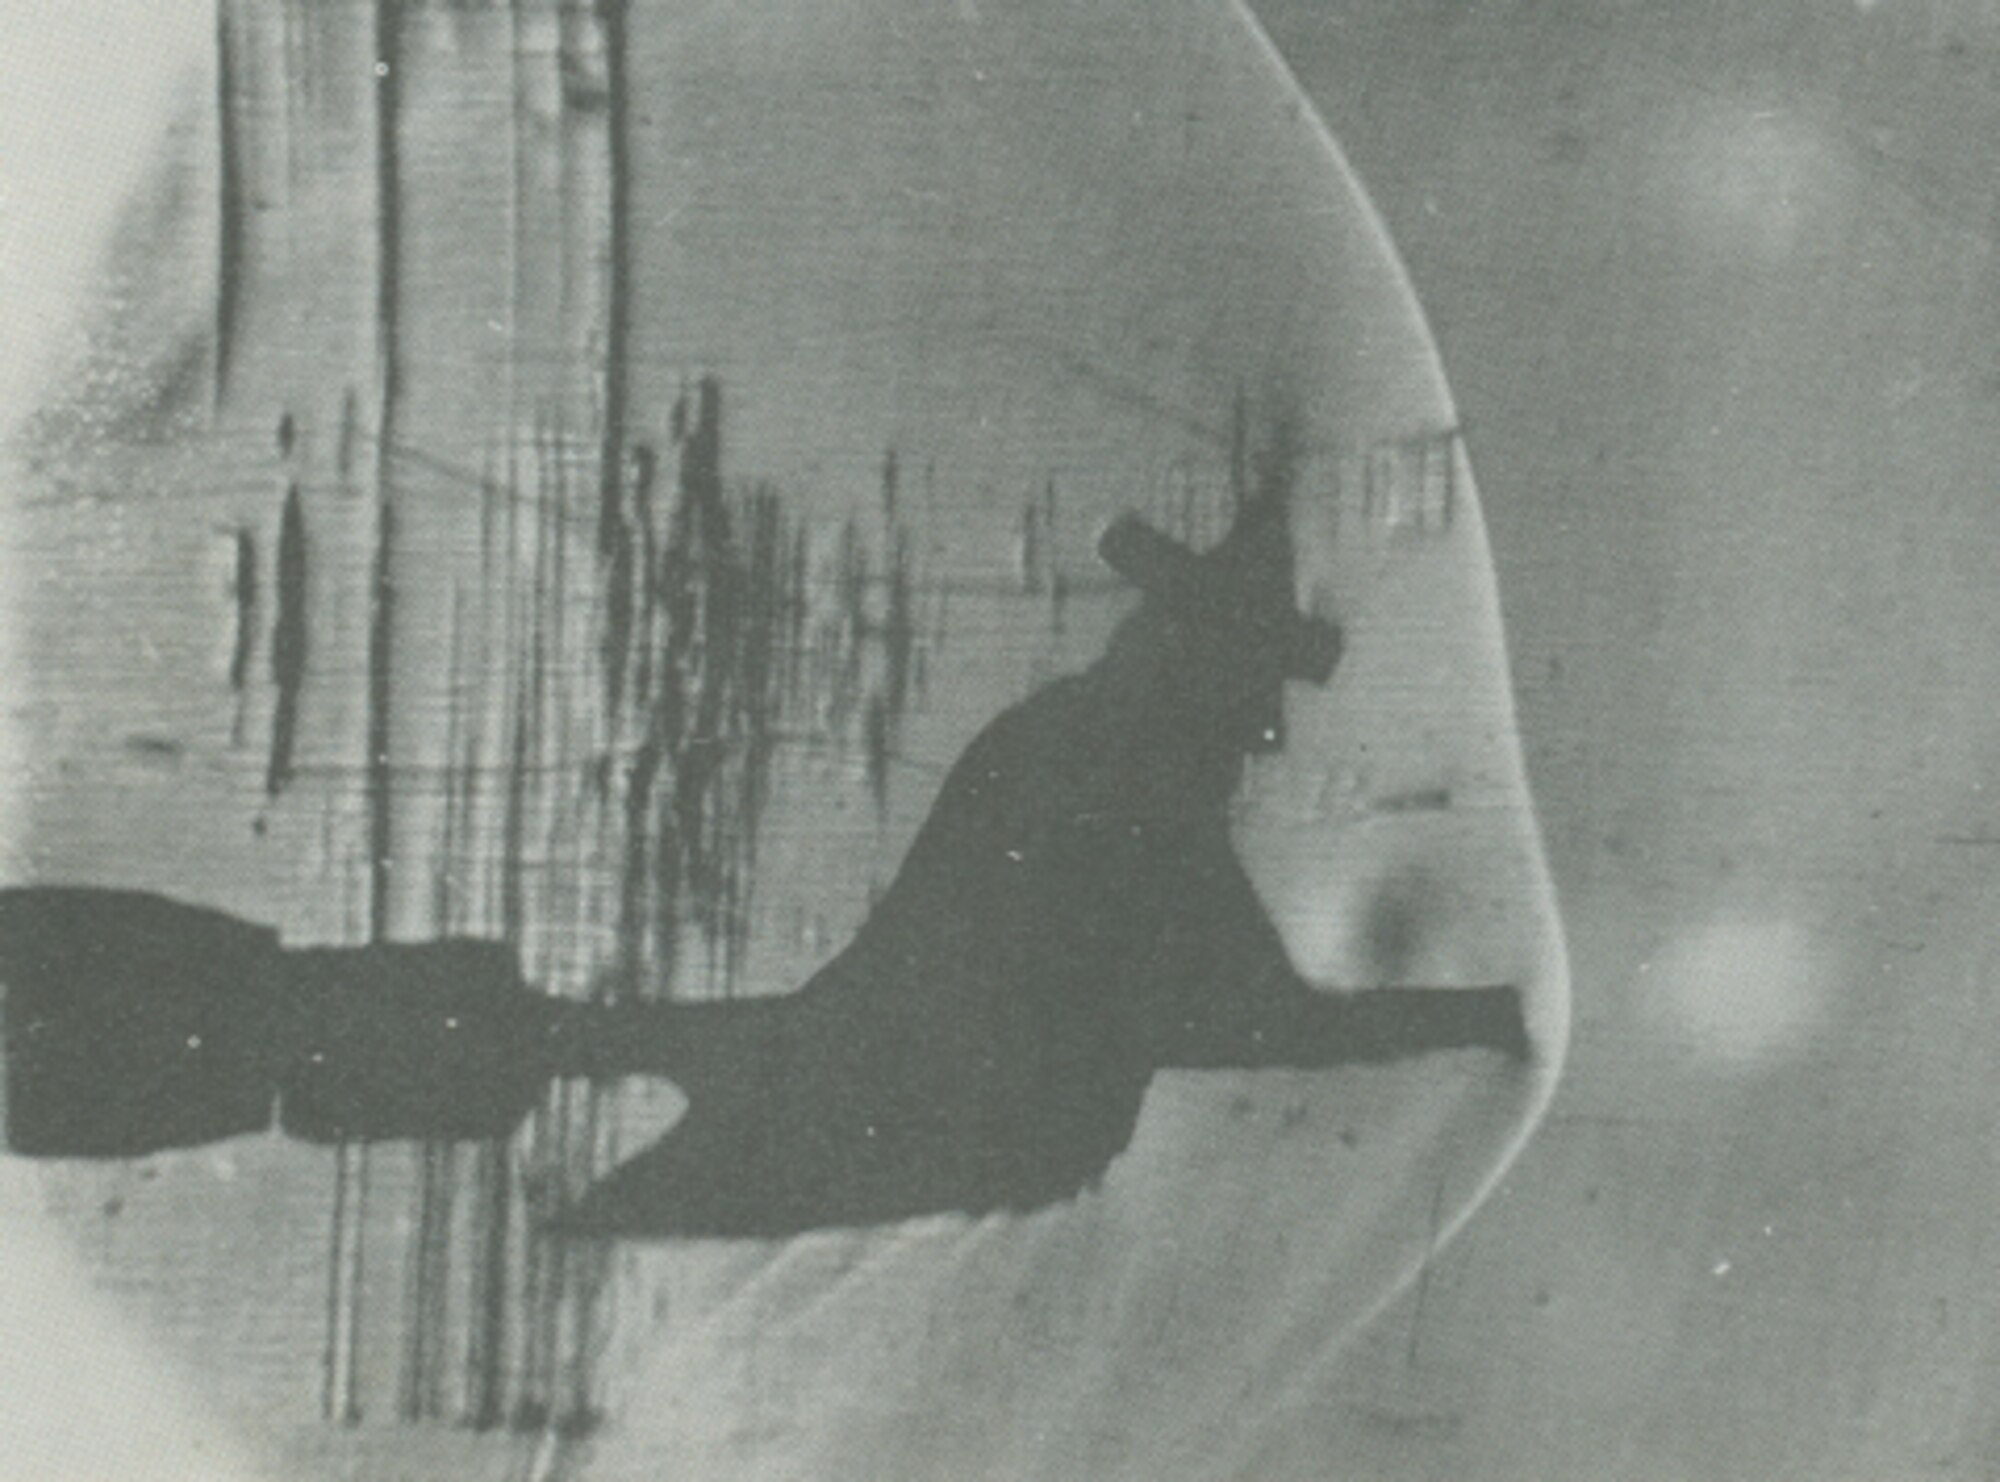 A Schlieren image captured in the 1960s of a small model of a witch riding a broomstick in the Mach 2 blowdown wind tunnel at Mississippi State University. (Courtesy photo)